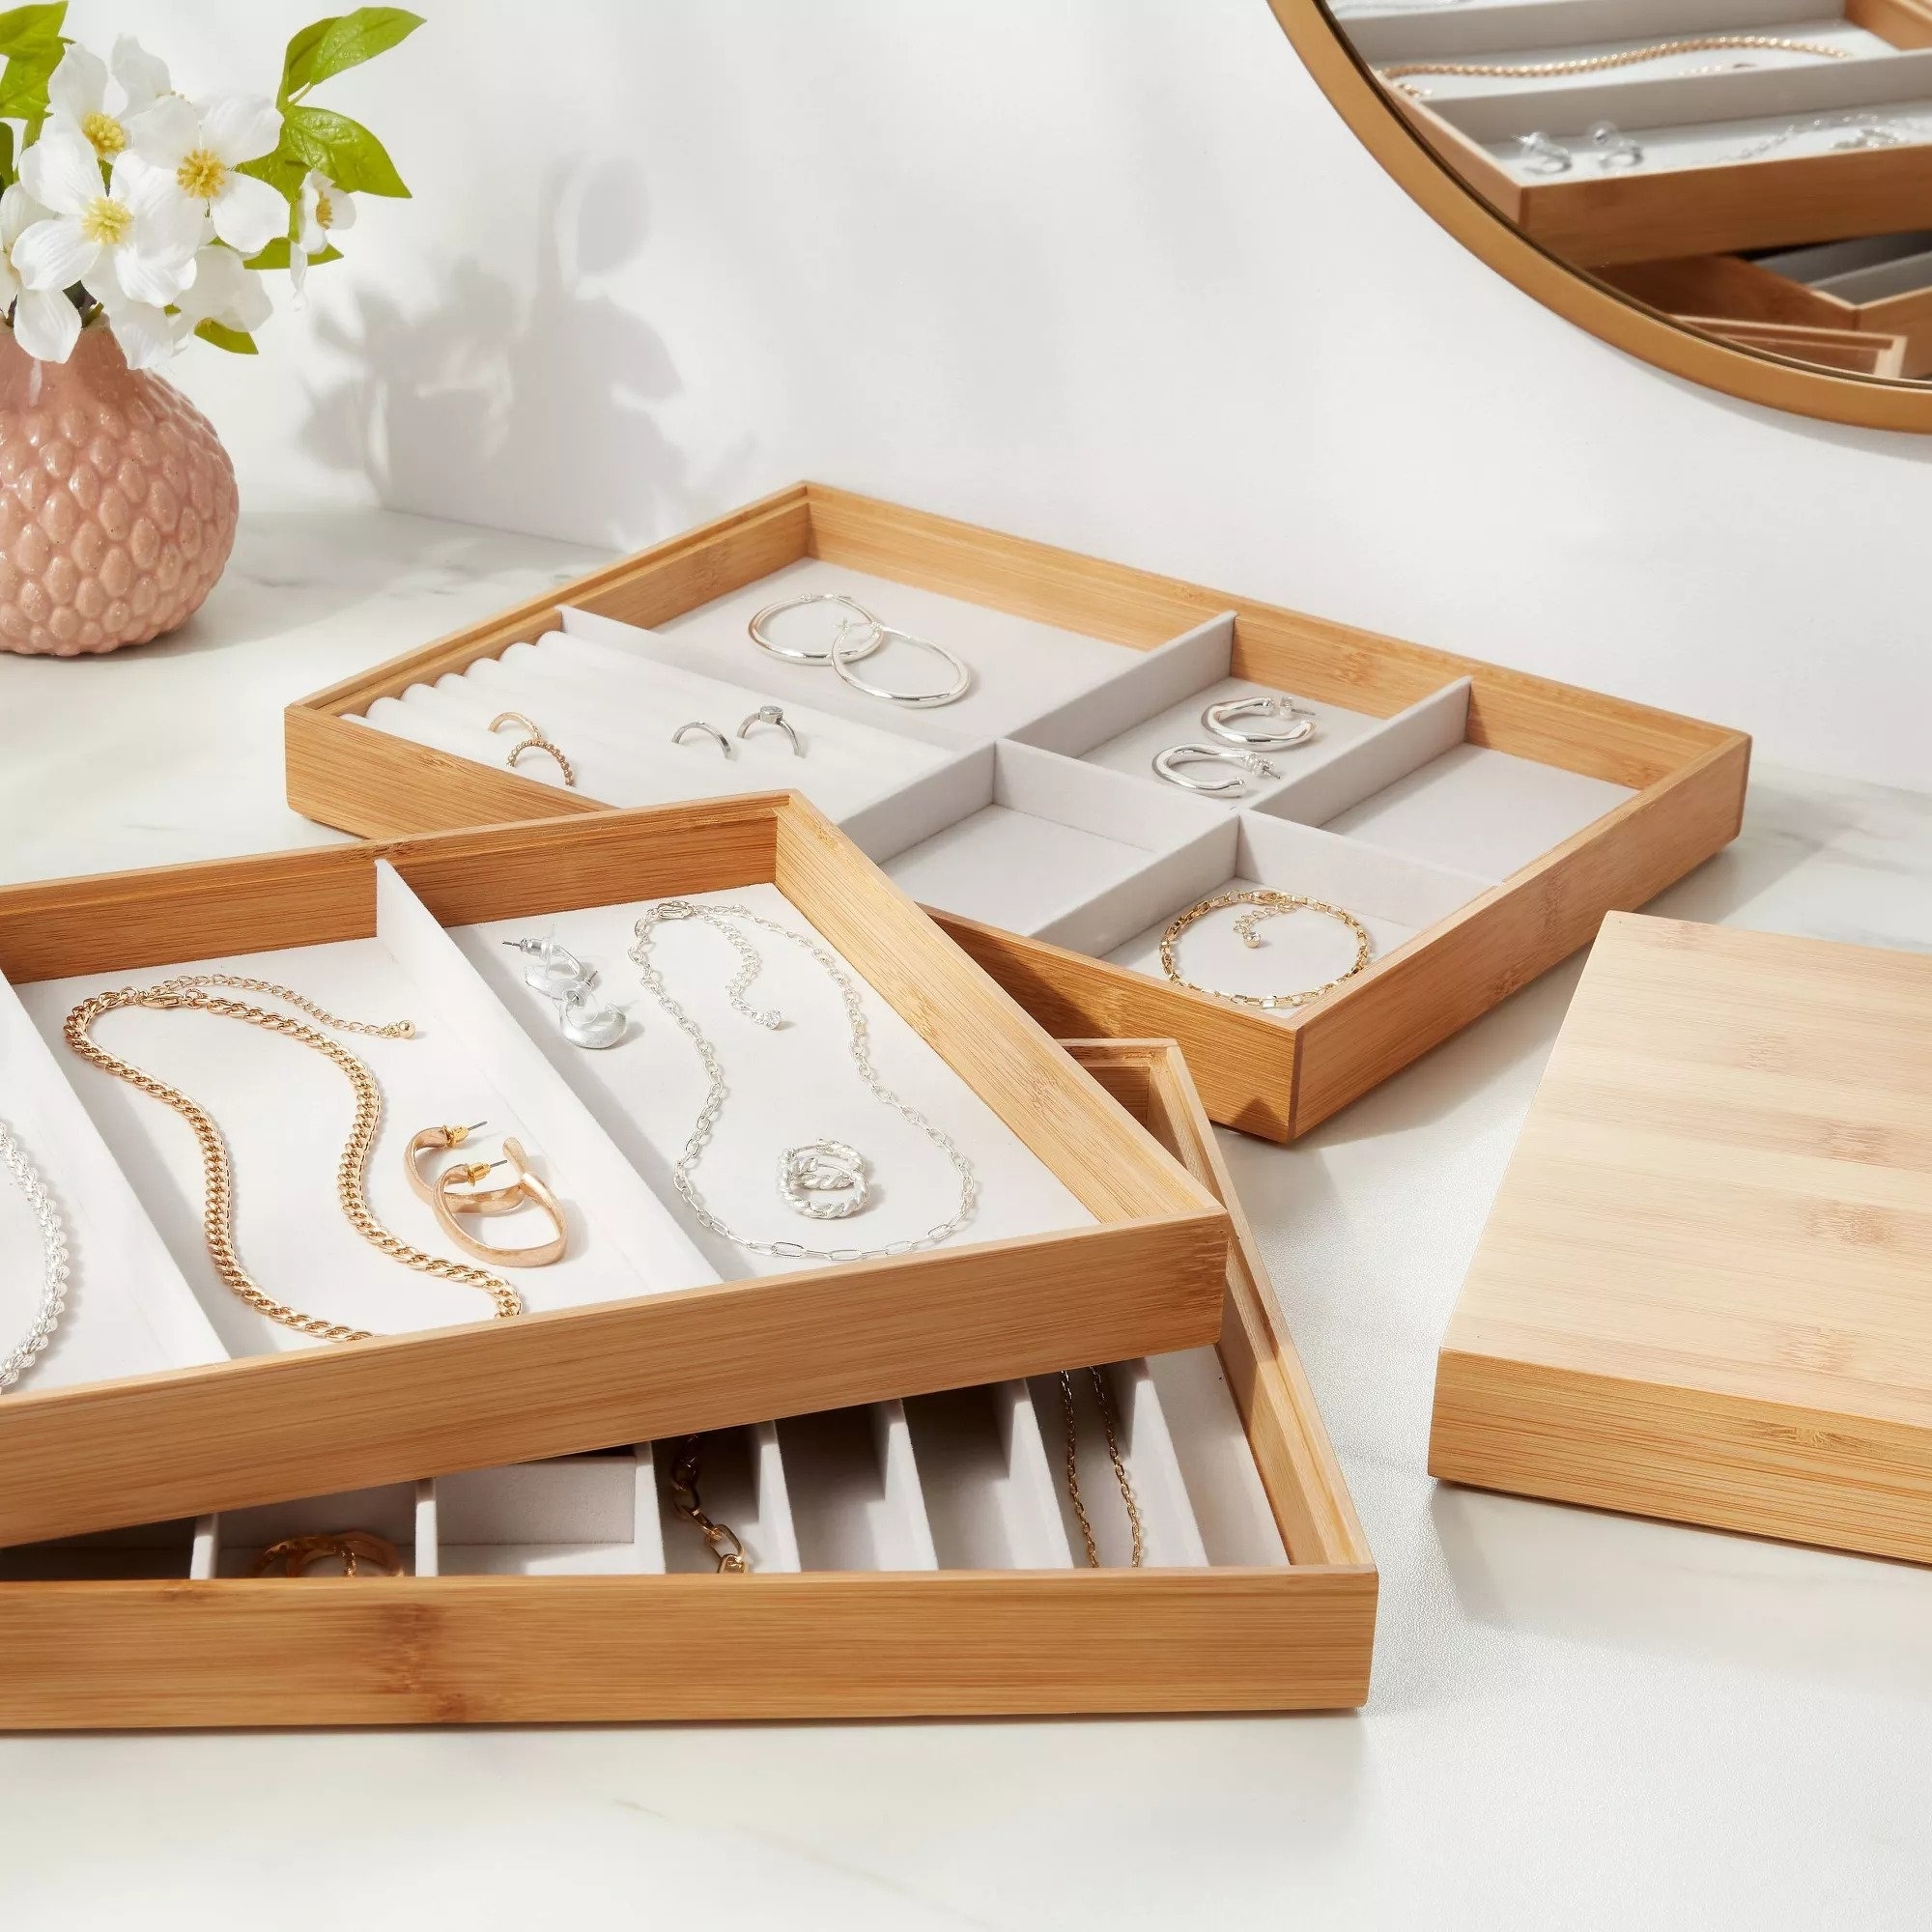 The trays, with light gray felt lining, in different configurations for storing different kinds of accessories